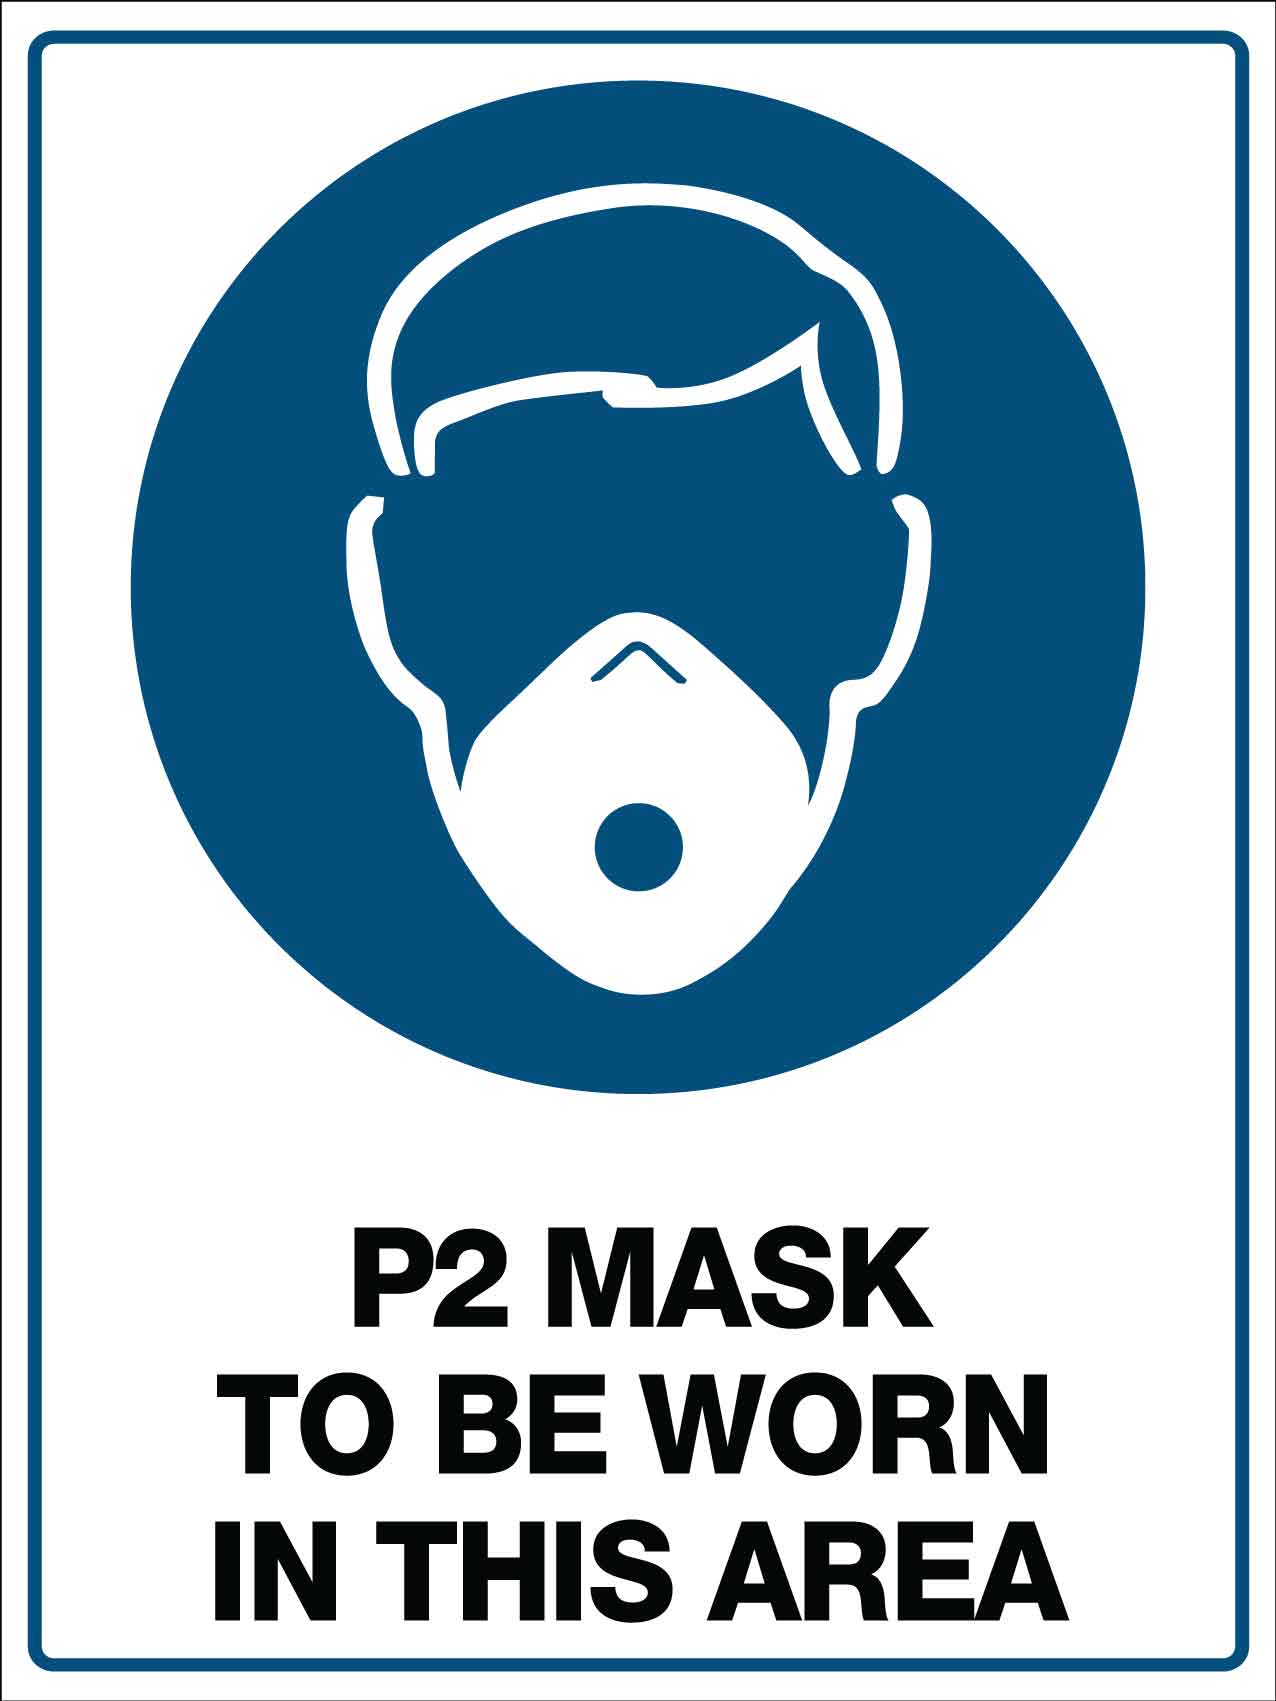 P2 Mask Must Be Worn in This Area Sign